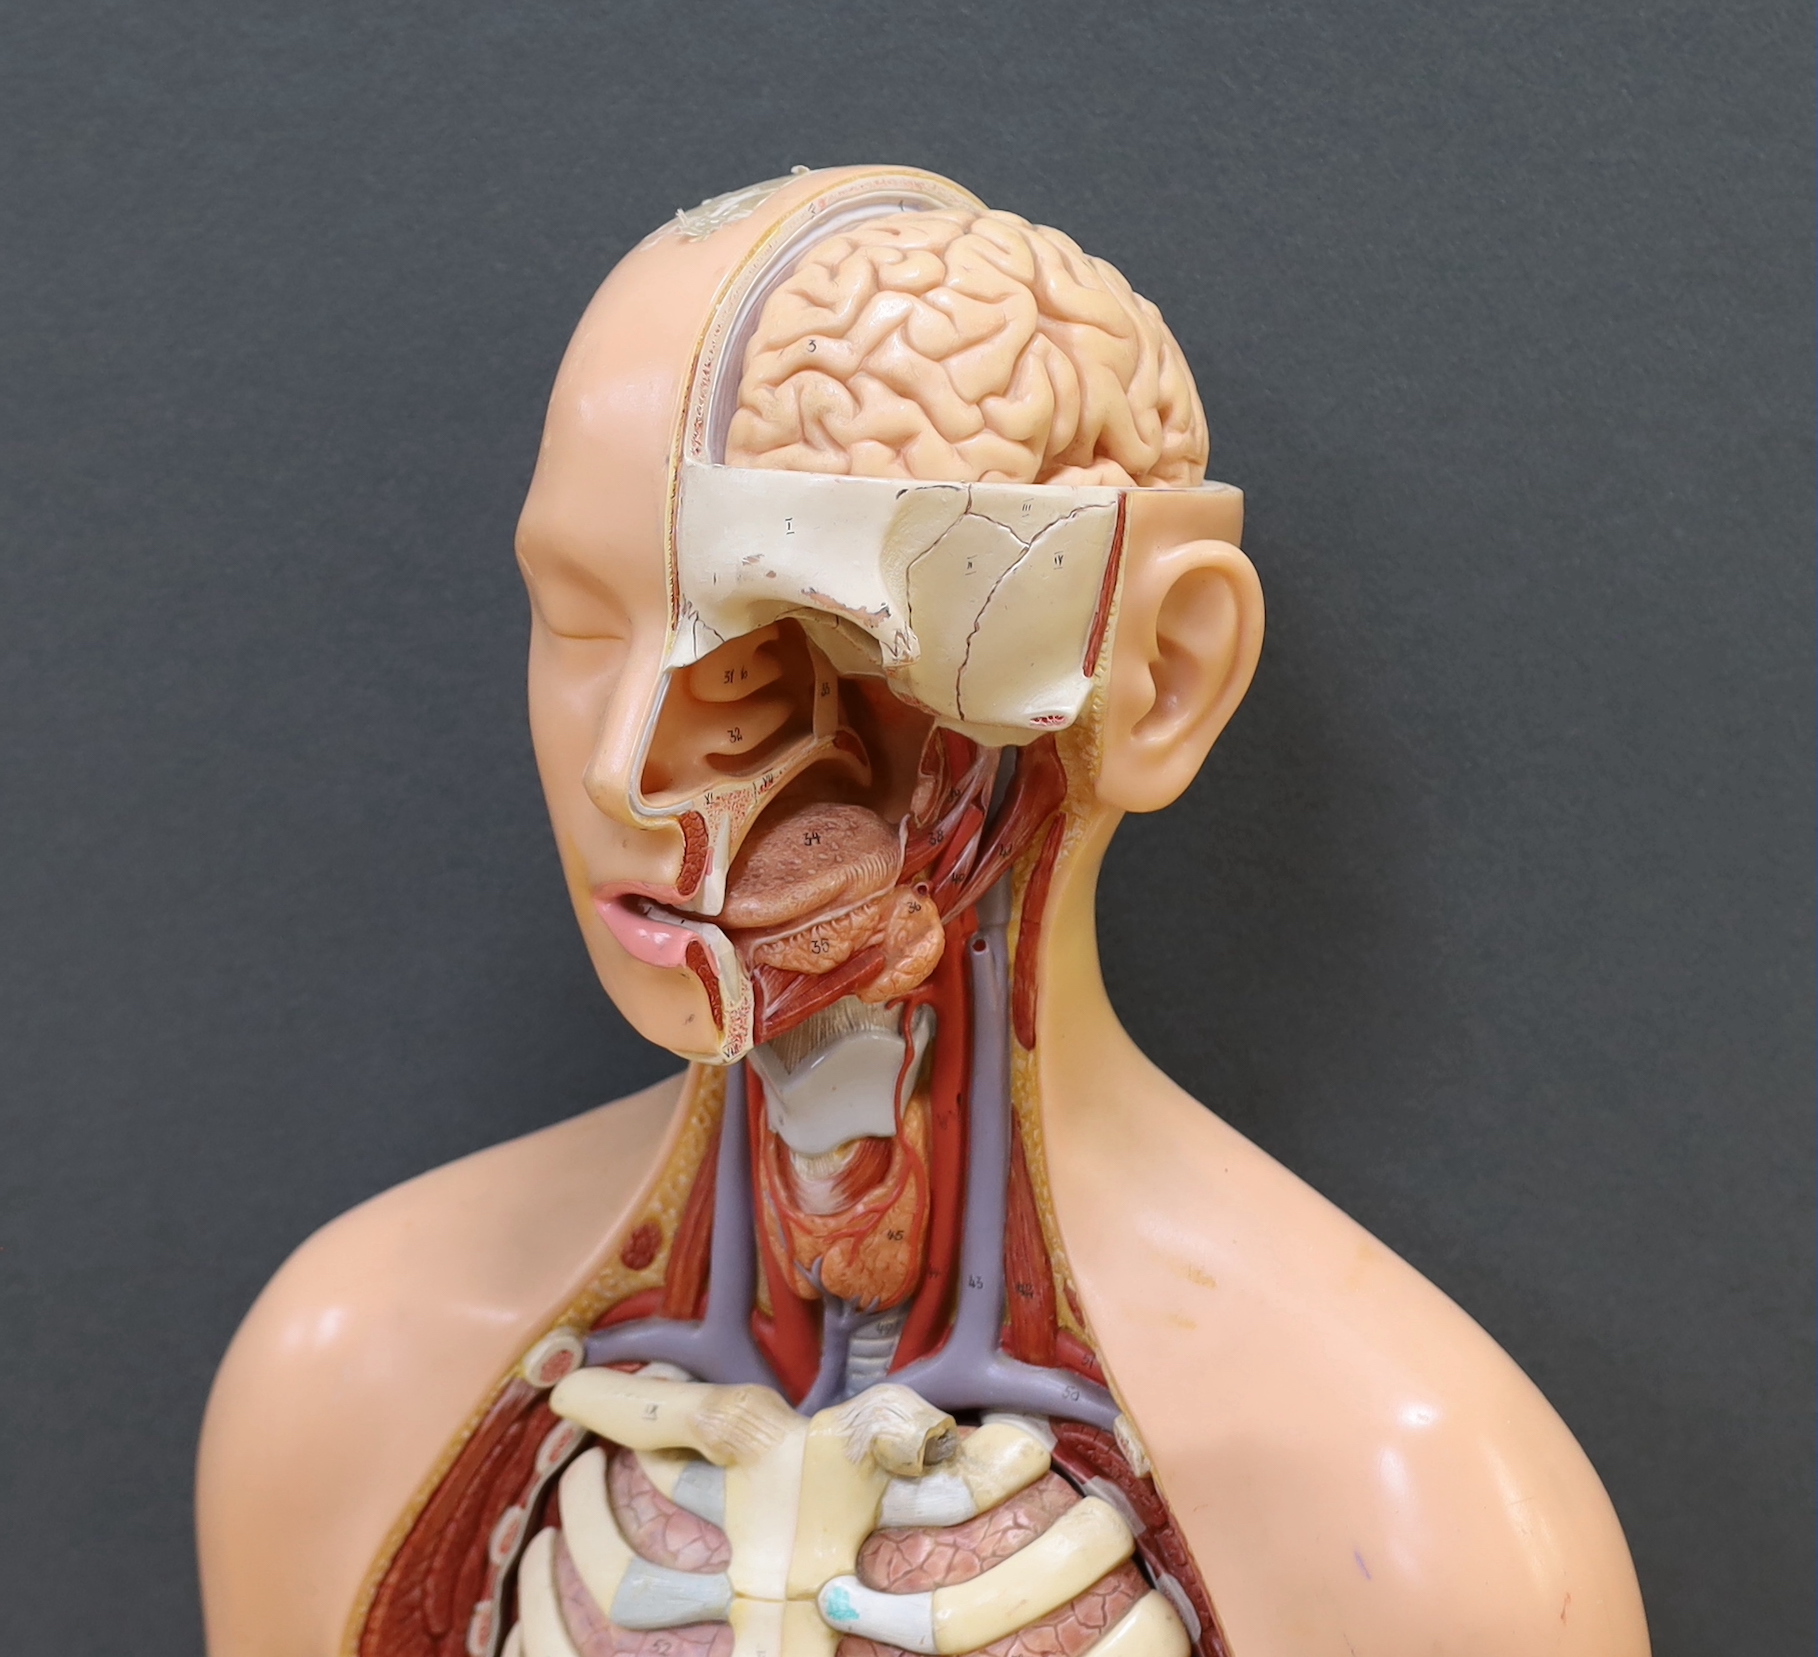 A 1960s medical school educational plastic anatomical model, with removable internal organs and cross-sections of skeleton, arterial system, muscular structures, etc. 84cm high